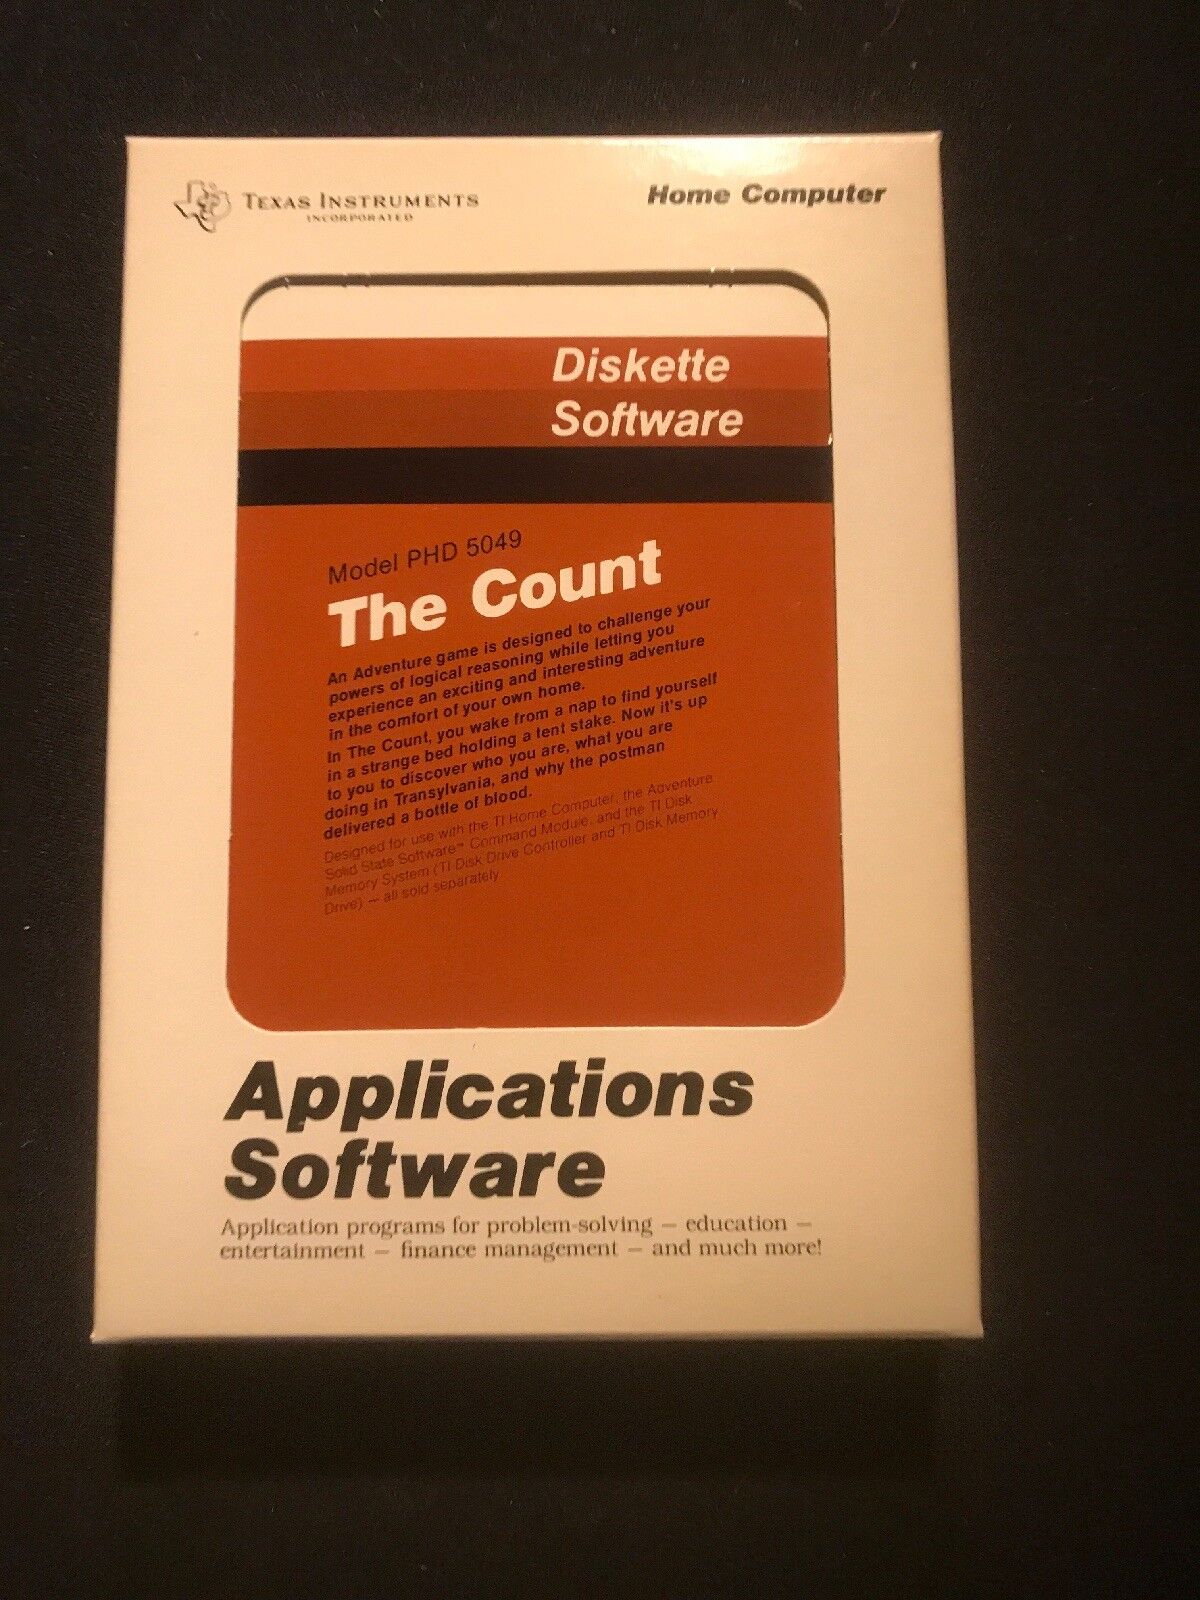 Minty New Nos TI99-4a Home Computer The Count Diskette Rare PHD 5049